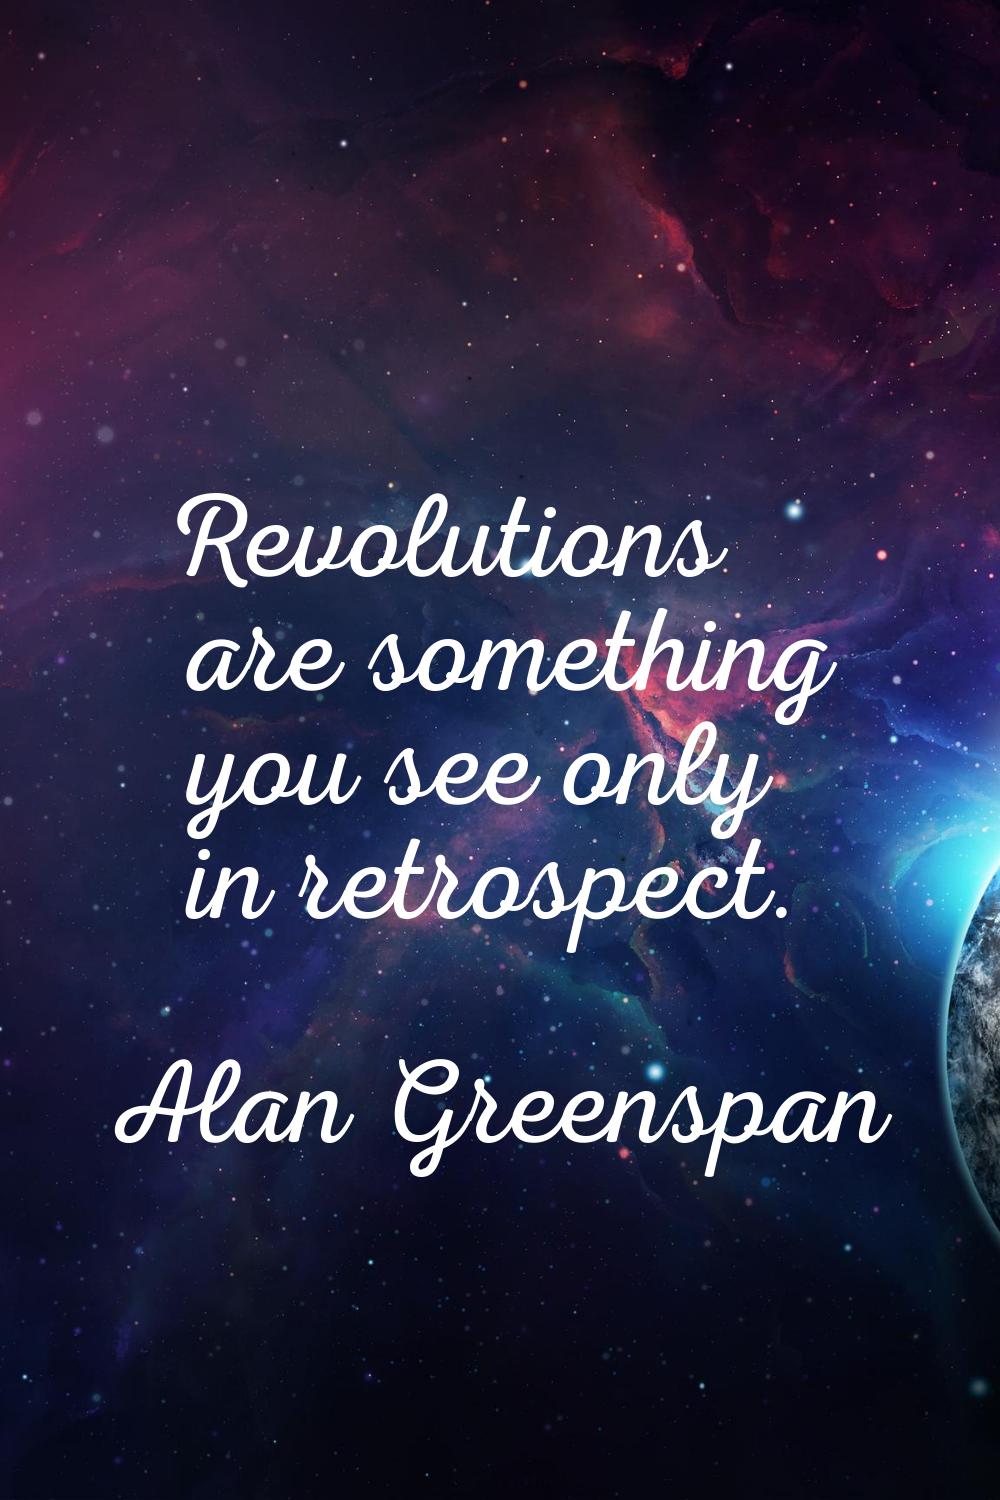 Revolutions are something you see only in retrospect.